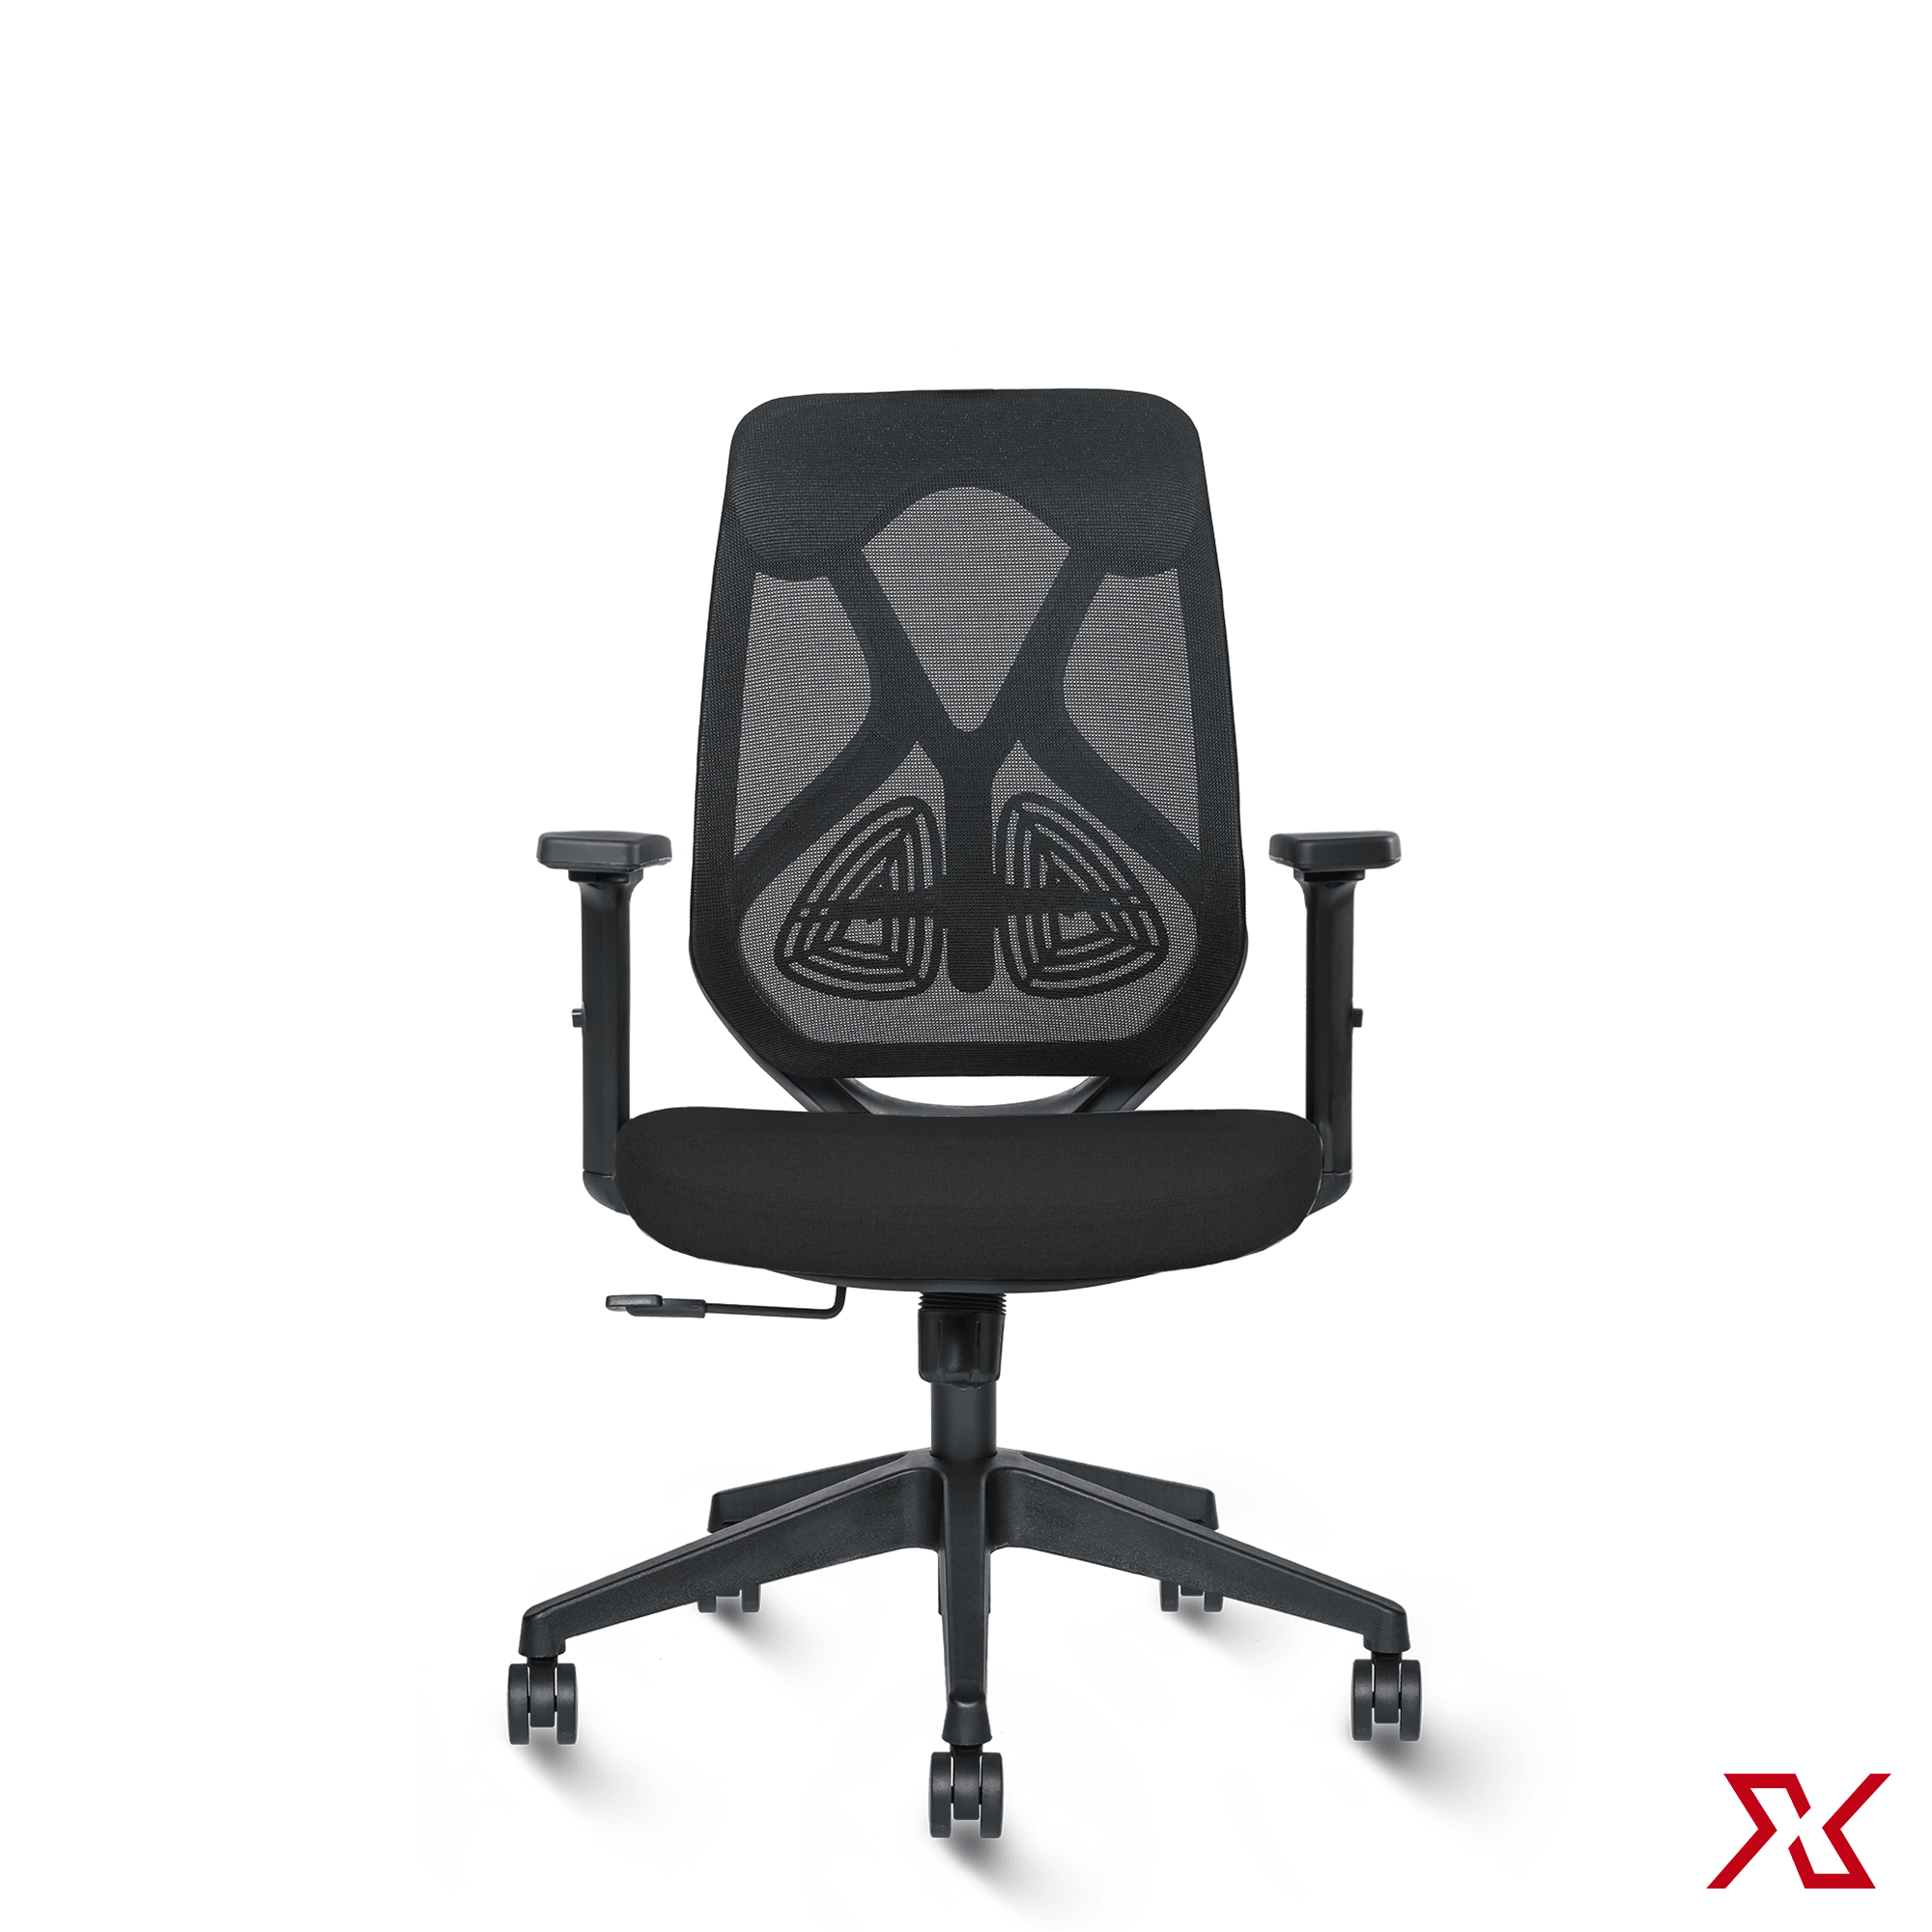 ZEN Medium Back LX (Black Chair) - Exclusiff Seating Sytems